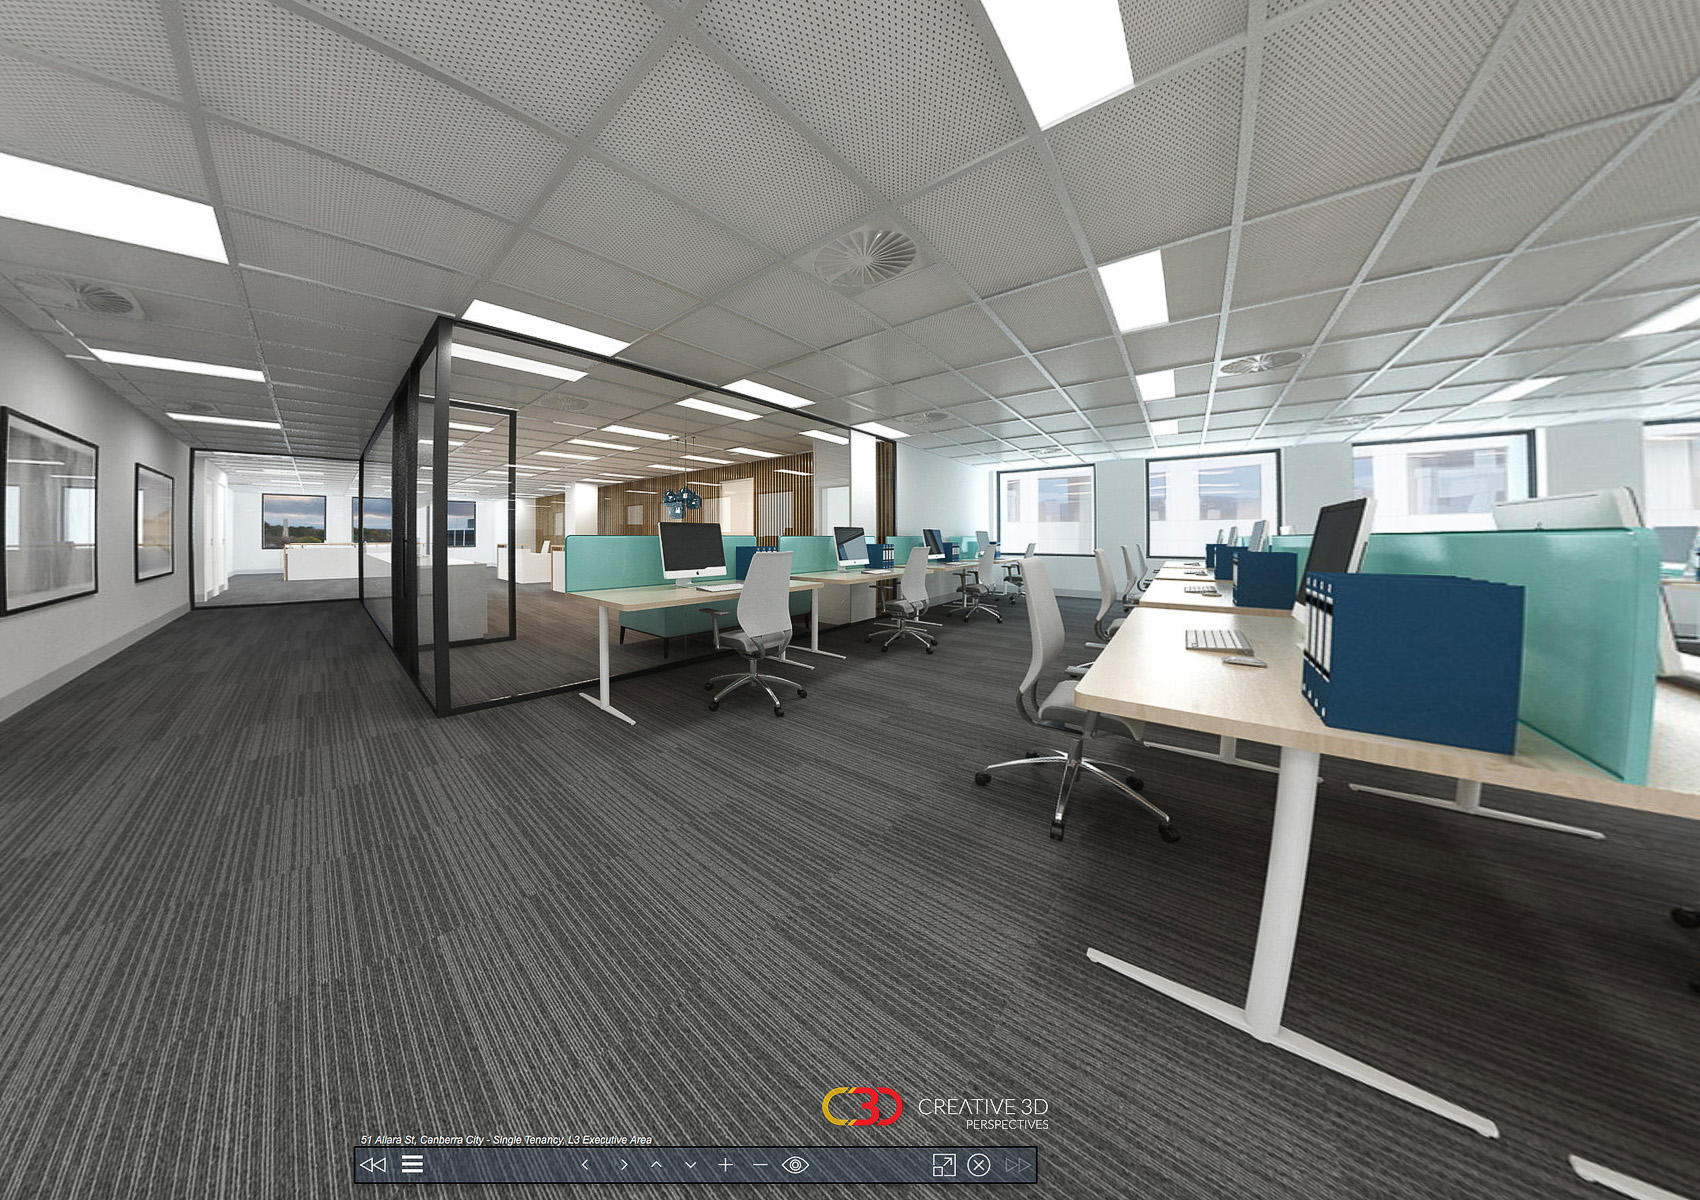 Inter-tenancy collaboration hub and breakout area shown, Creative 3D Perspective interior office screenshot from a virtual tour